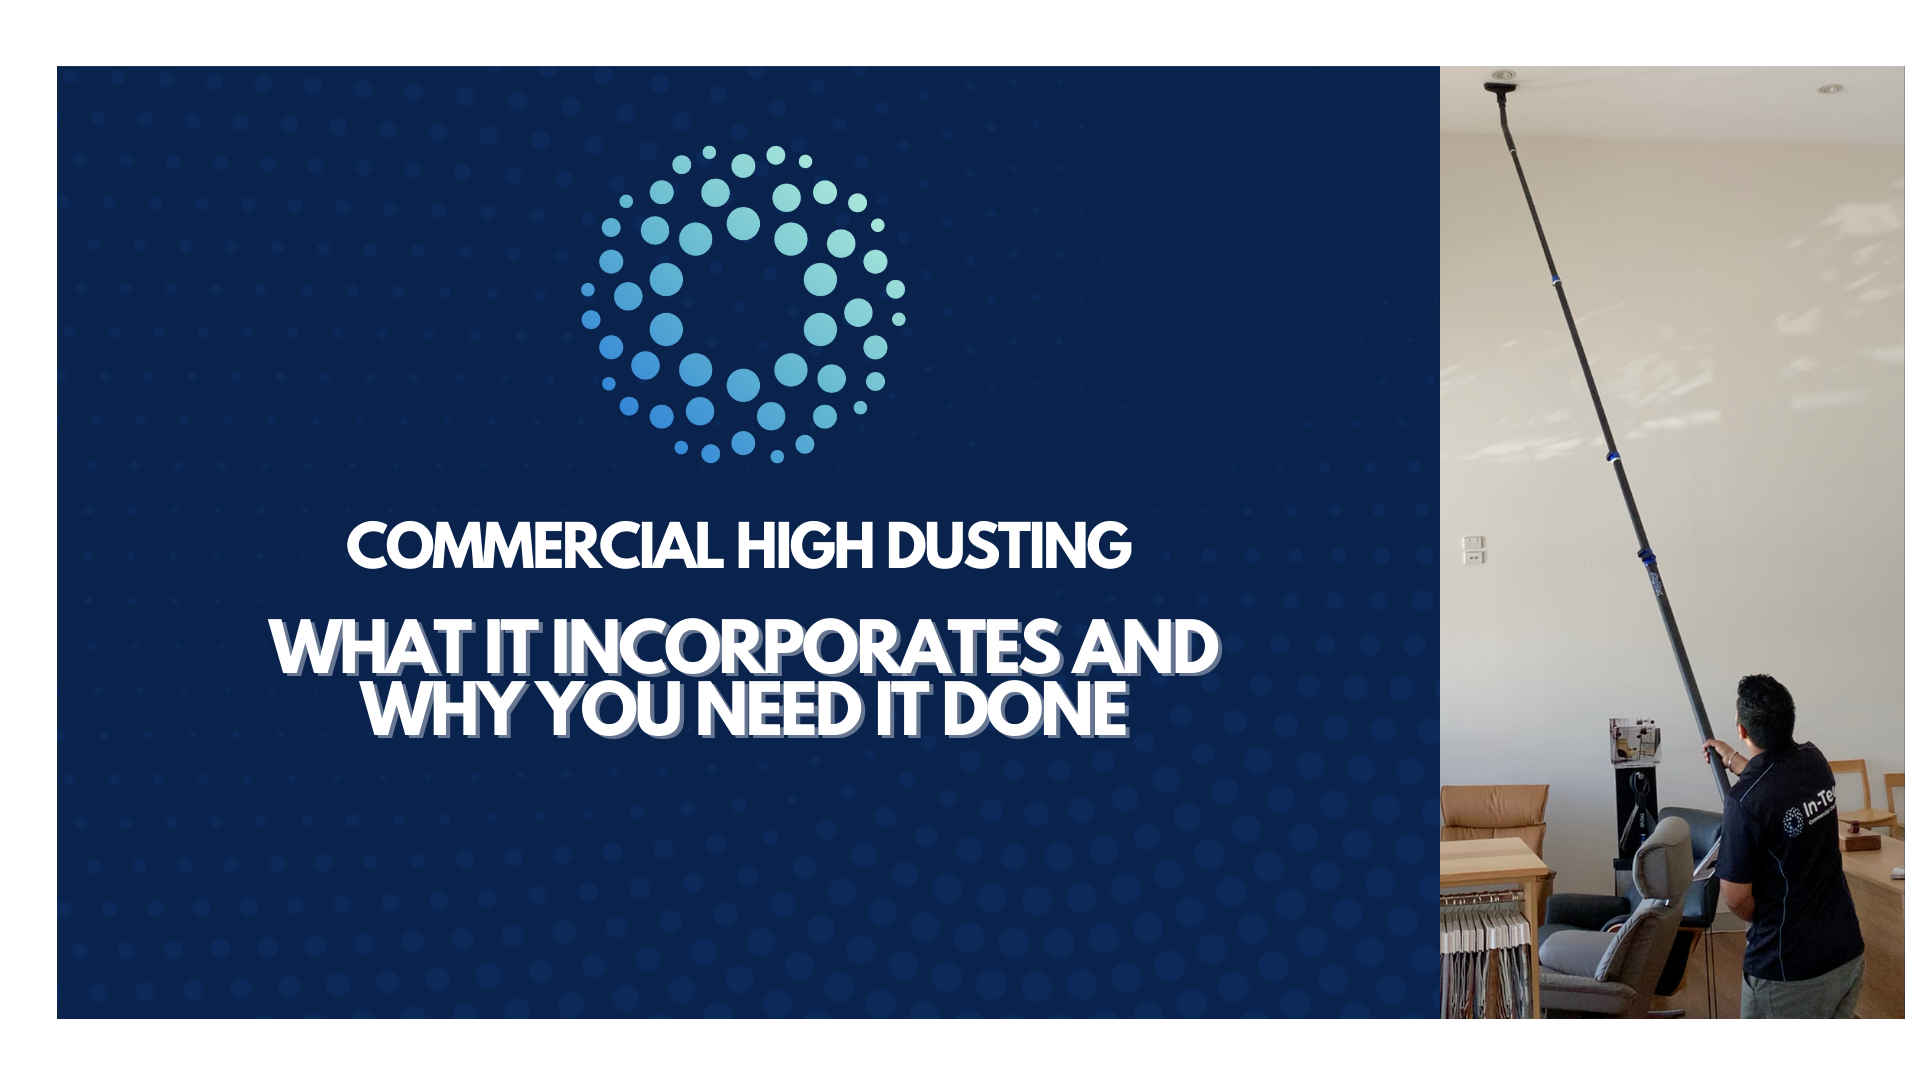 What is Commercial High Dusting?